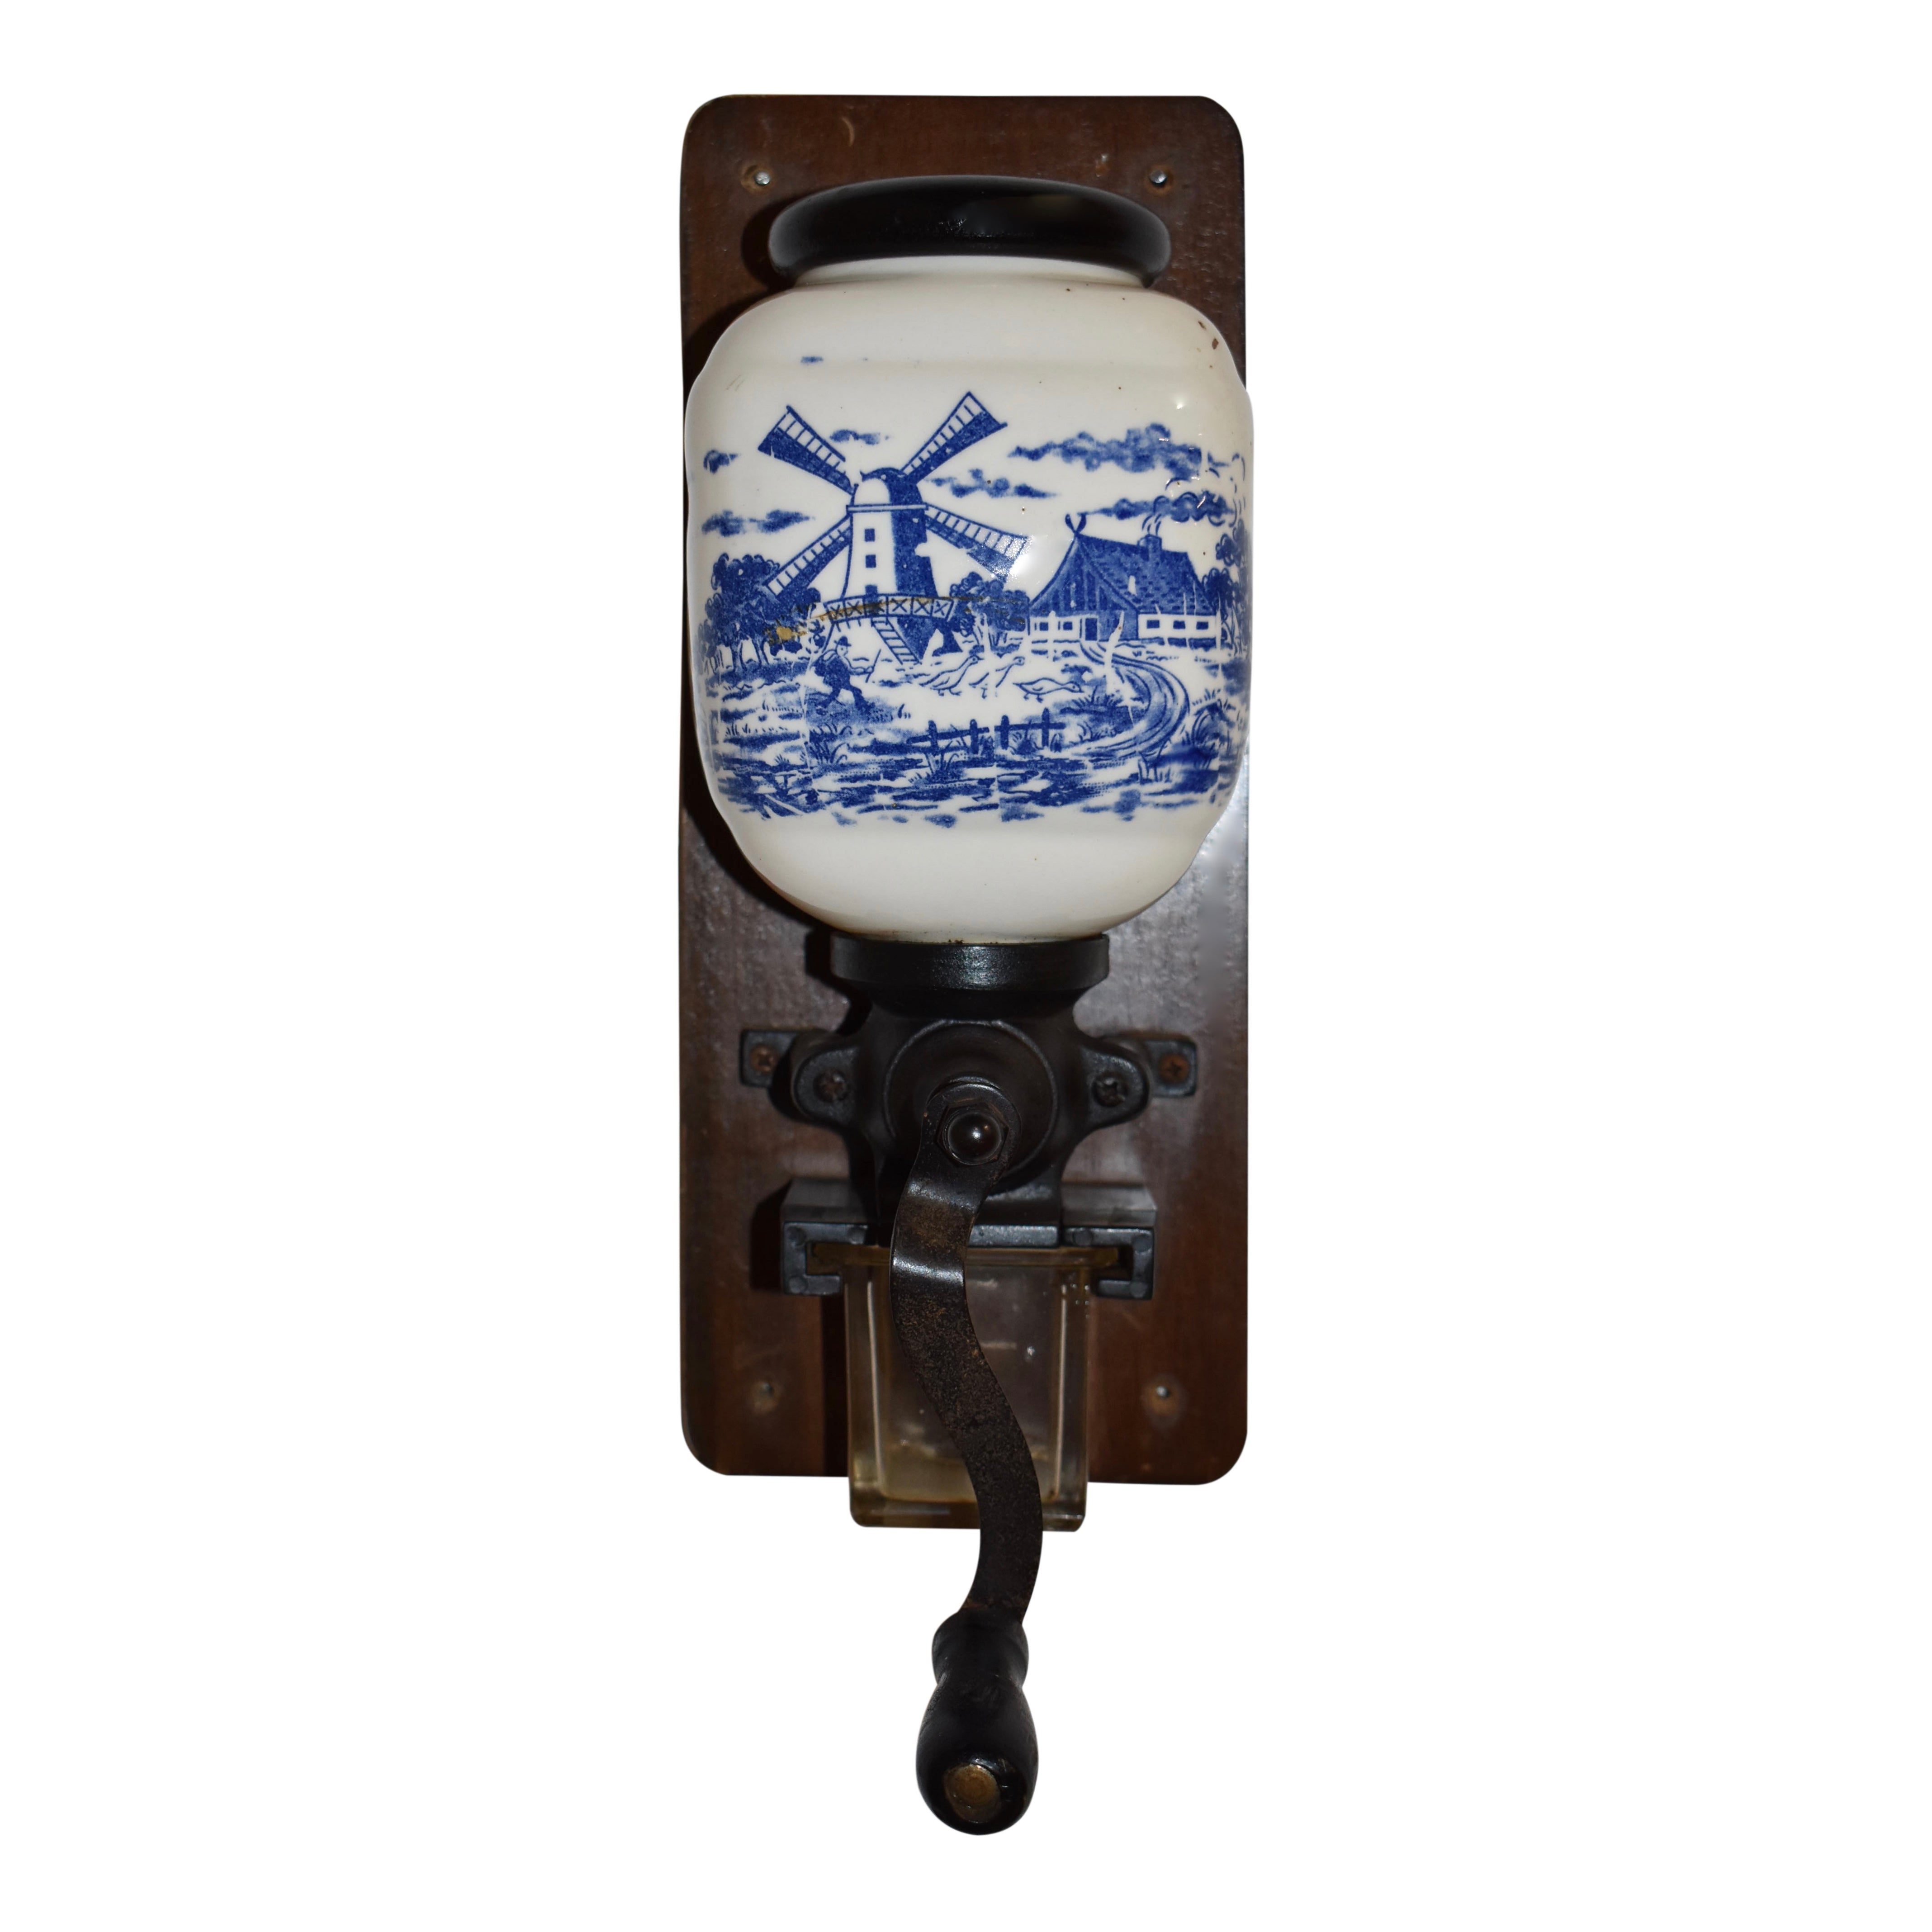 Dutch Wall-Mounted Hand-Cranked Coffee Grinder